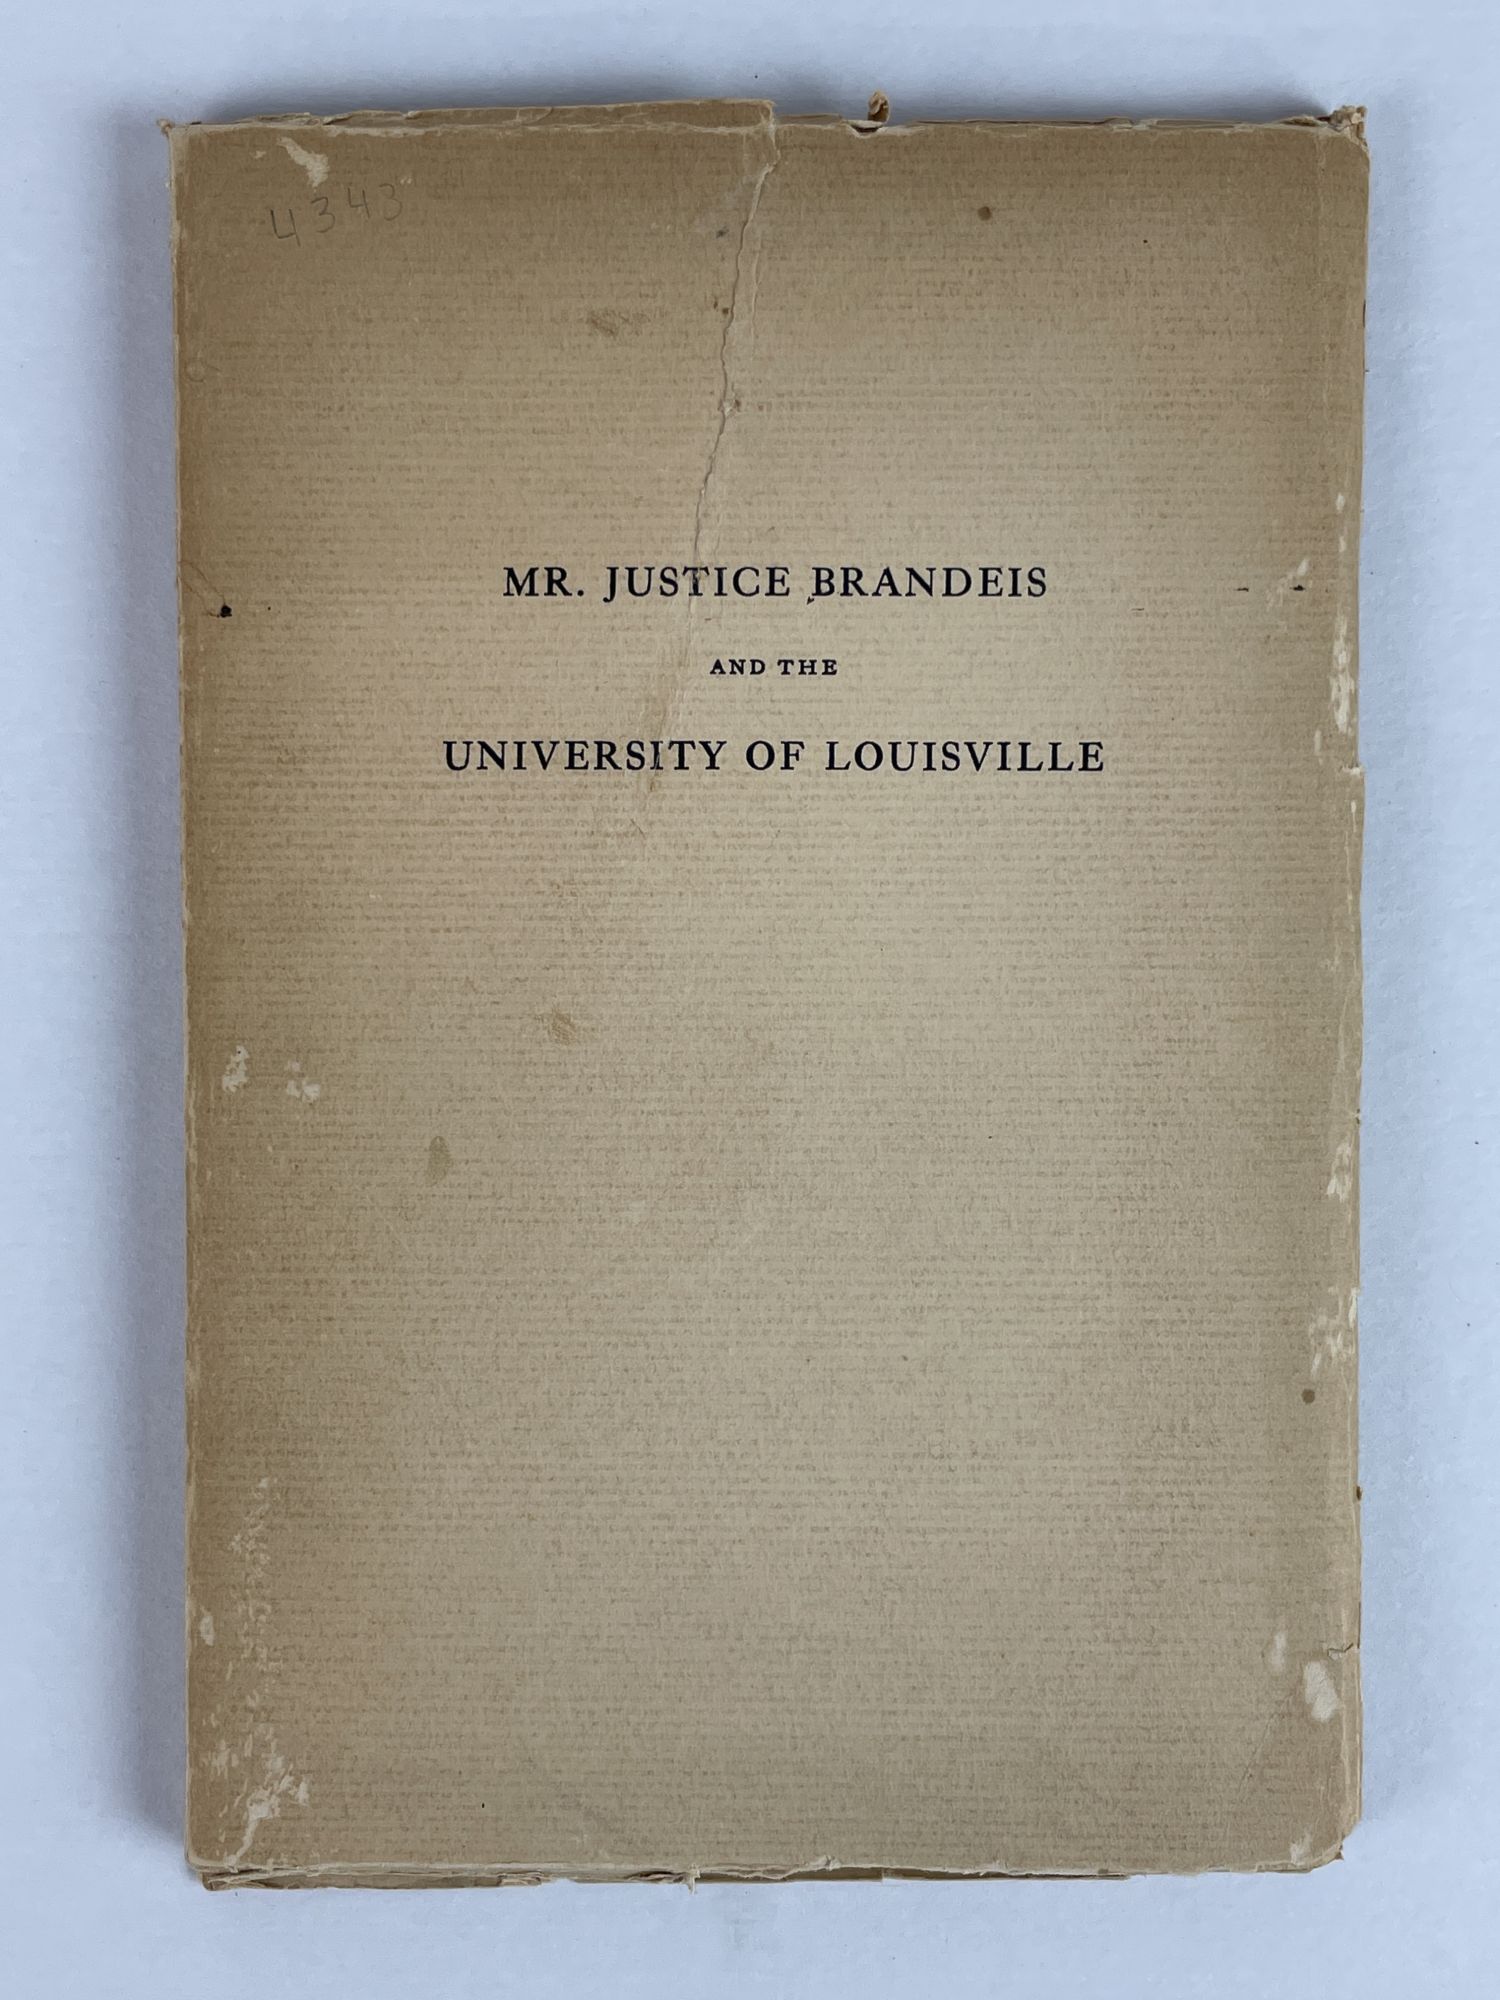 MR. JUSTICE BRANDEIS AND THE UNIVERSITY OF LOUISVILLE [SIGNED BY